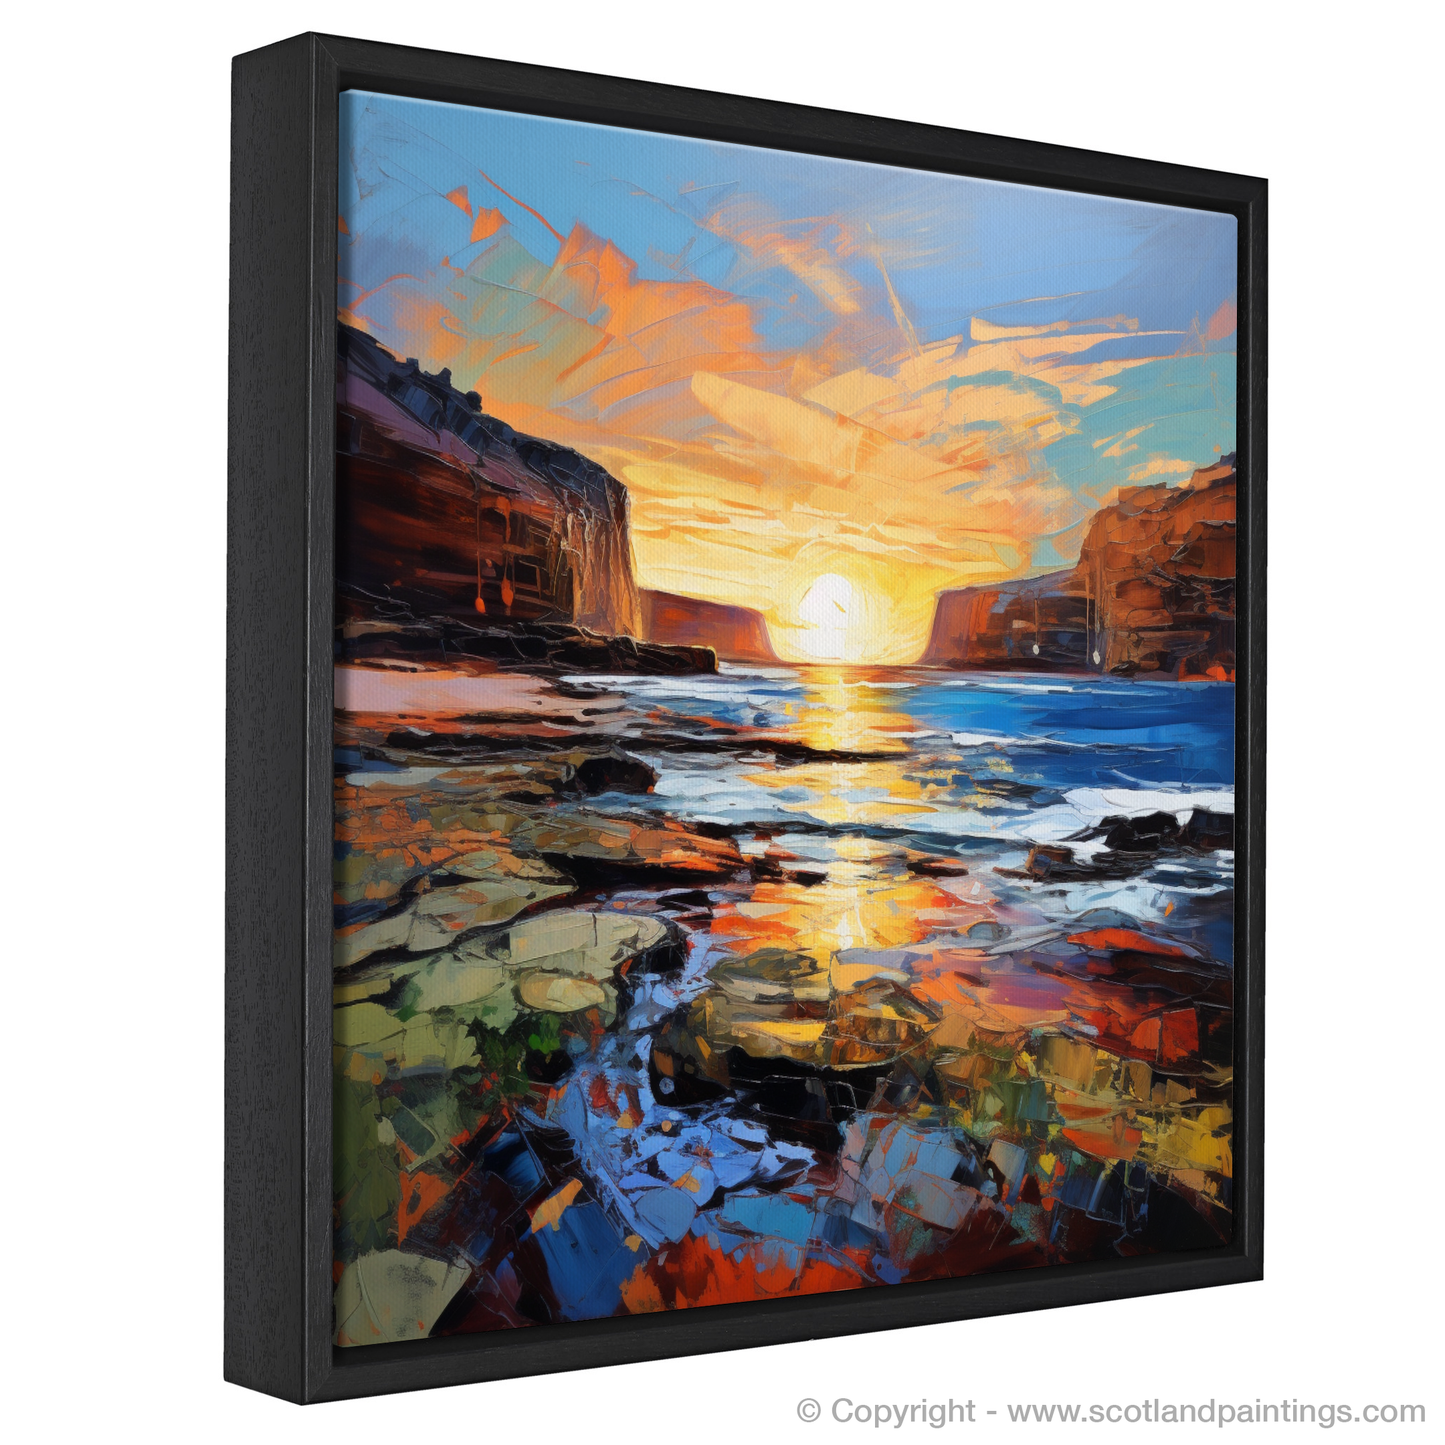 Painting and Art Print of Catterline Bay at golden hour. Golden Hour at Catterline Bay: An Expressionist Ode to Scottish Shores.